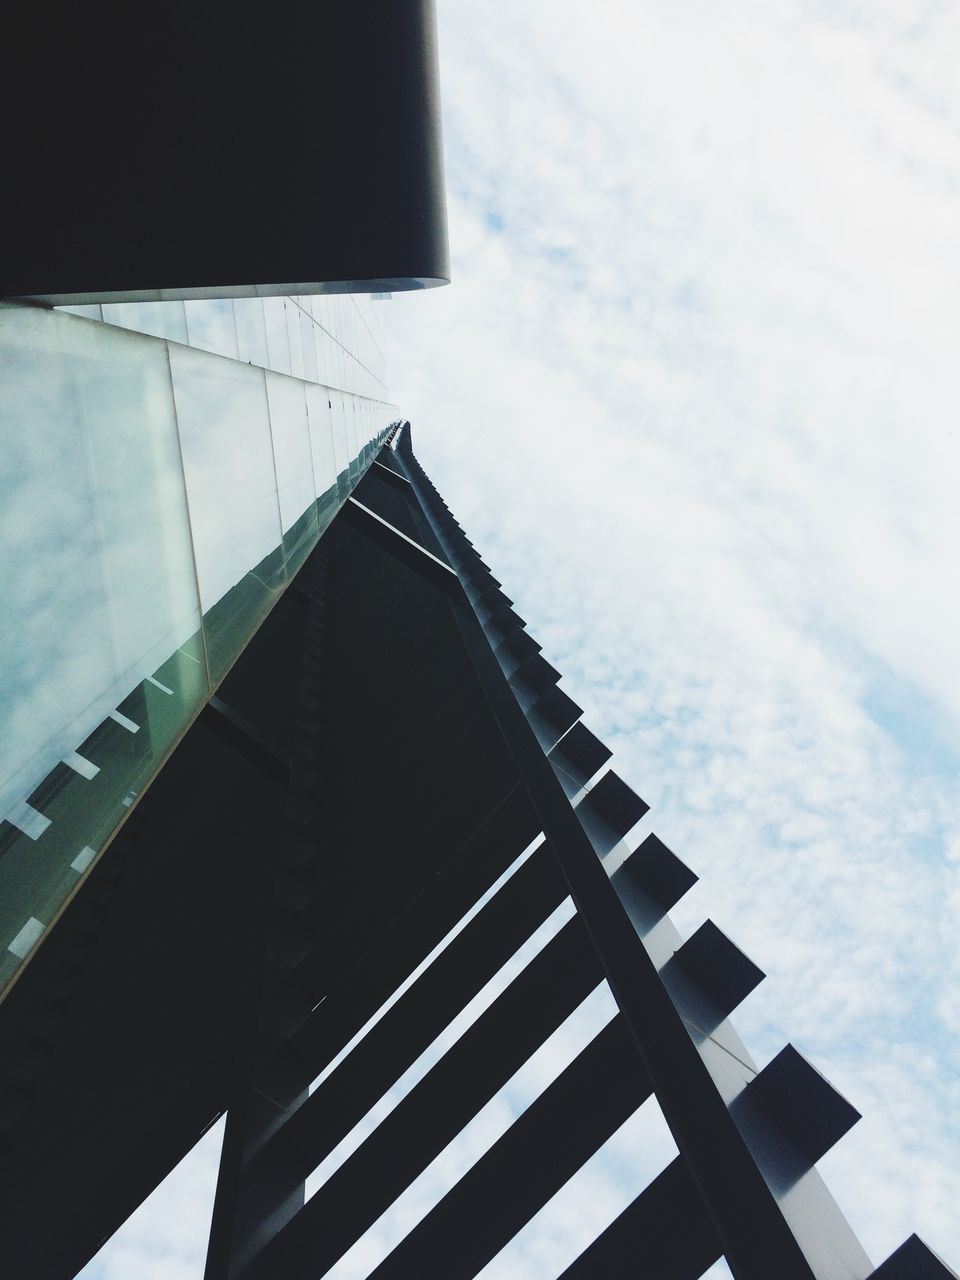 architecture, built structure, low angle view, building exterior, modern, sky, building, office building, city, glass - material, window, directly below, skyscraper, day, reflection, cloud - sky, no people, tall - high, outdoors, tower